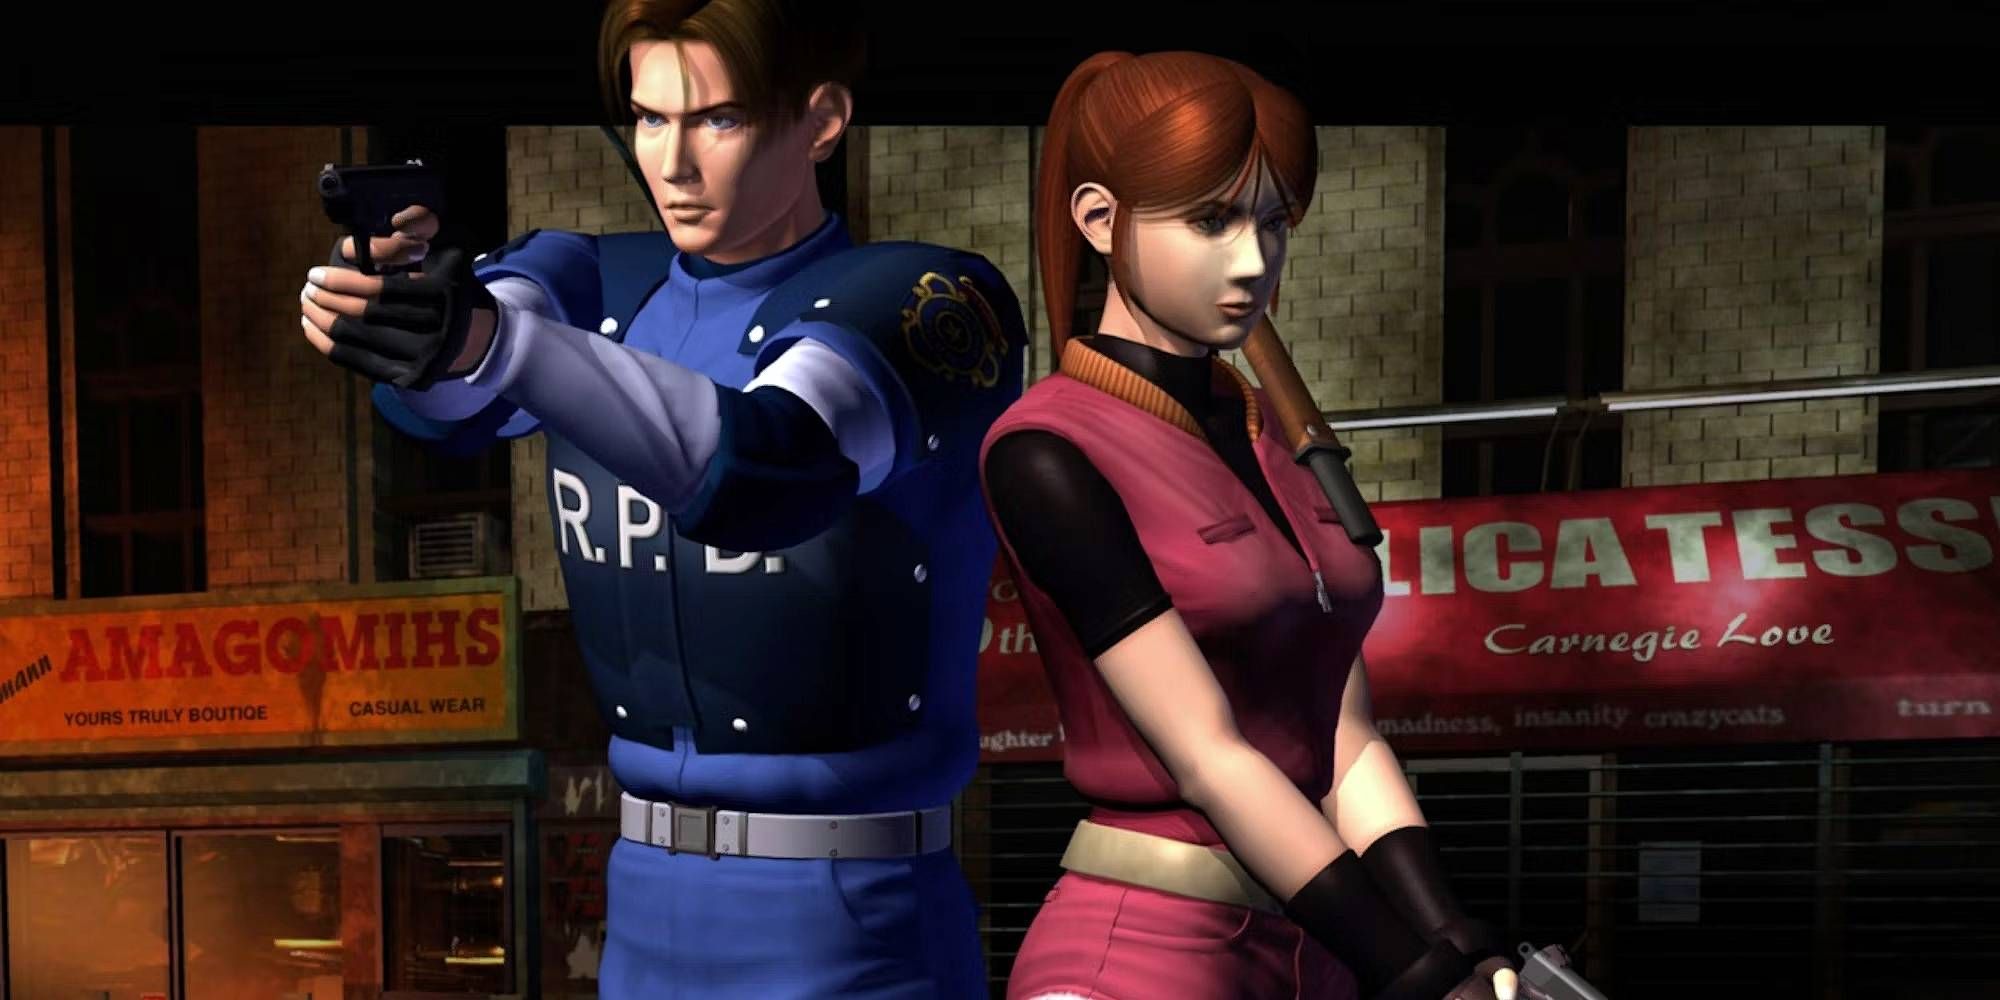 A police officer and a woman pose in a dark urban environment in Resident Evil 2